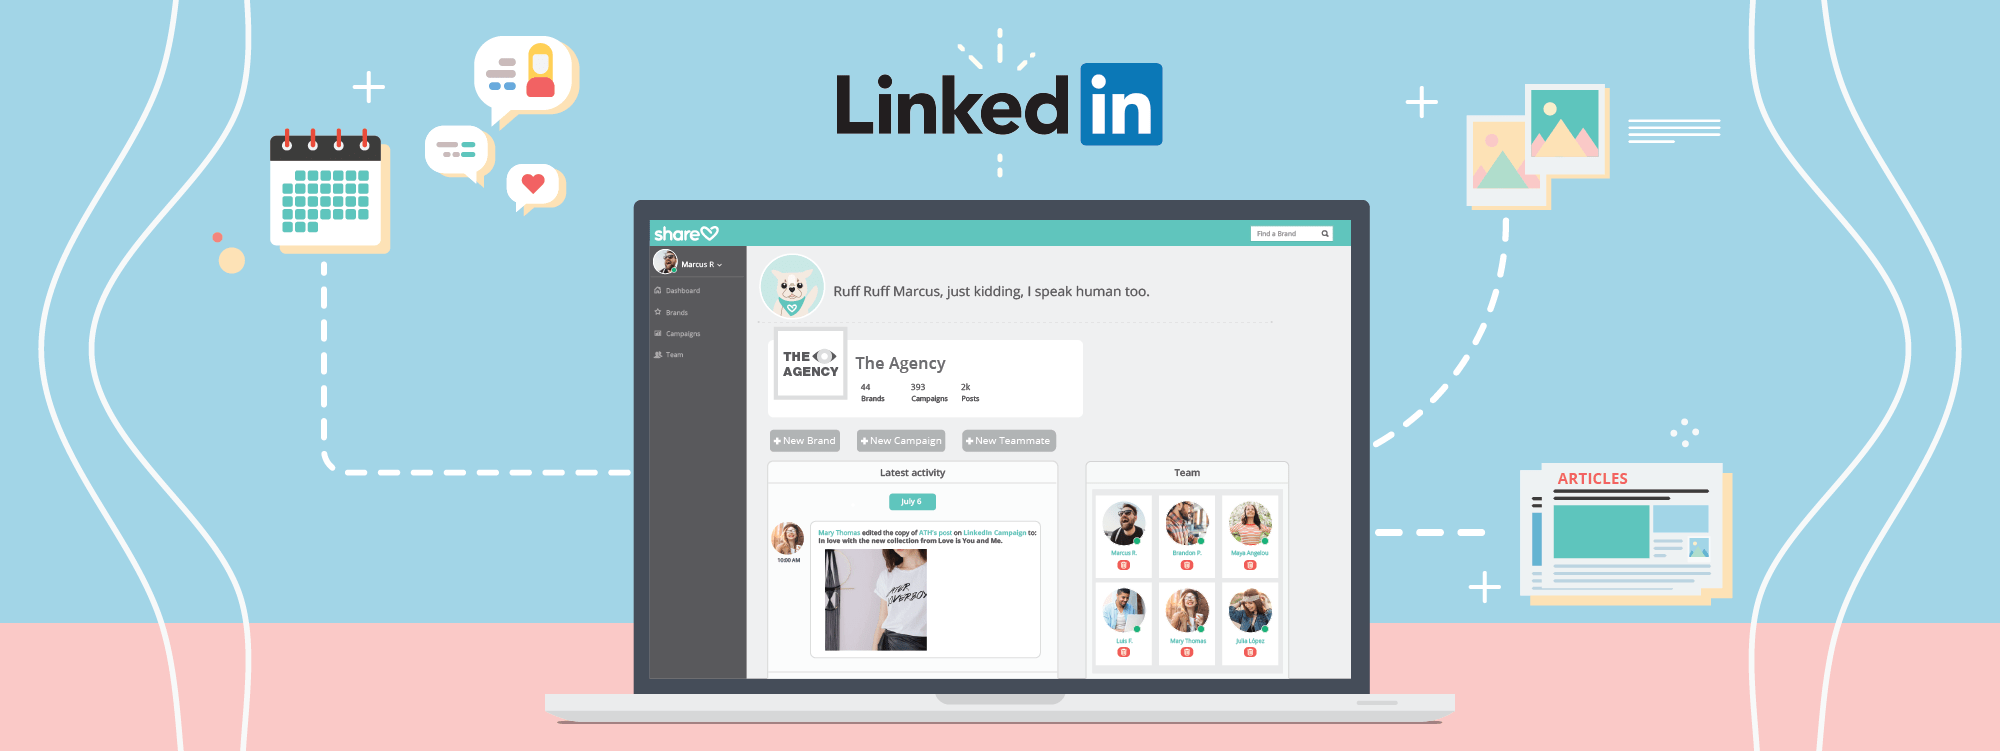 LinkedIn, the world’s largest social network for working professionals is now connected to Sharelov! You can now create and publish all your LinkedIn campaigns from Sharelov.